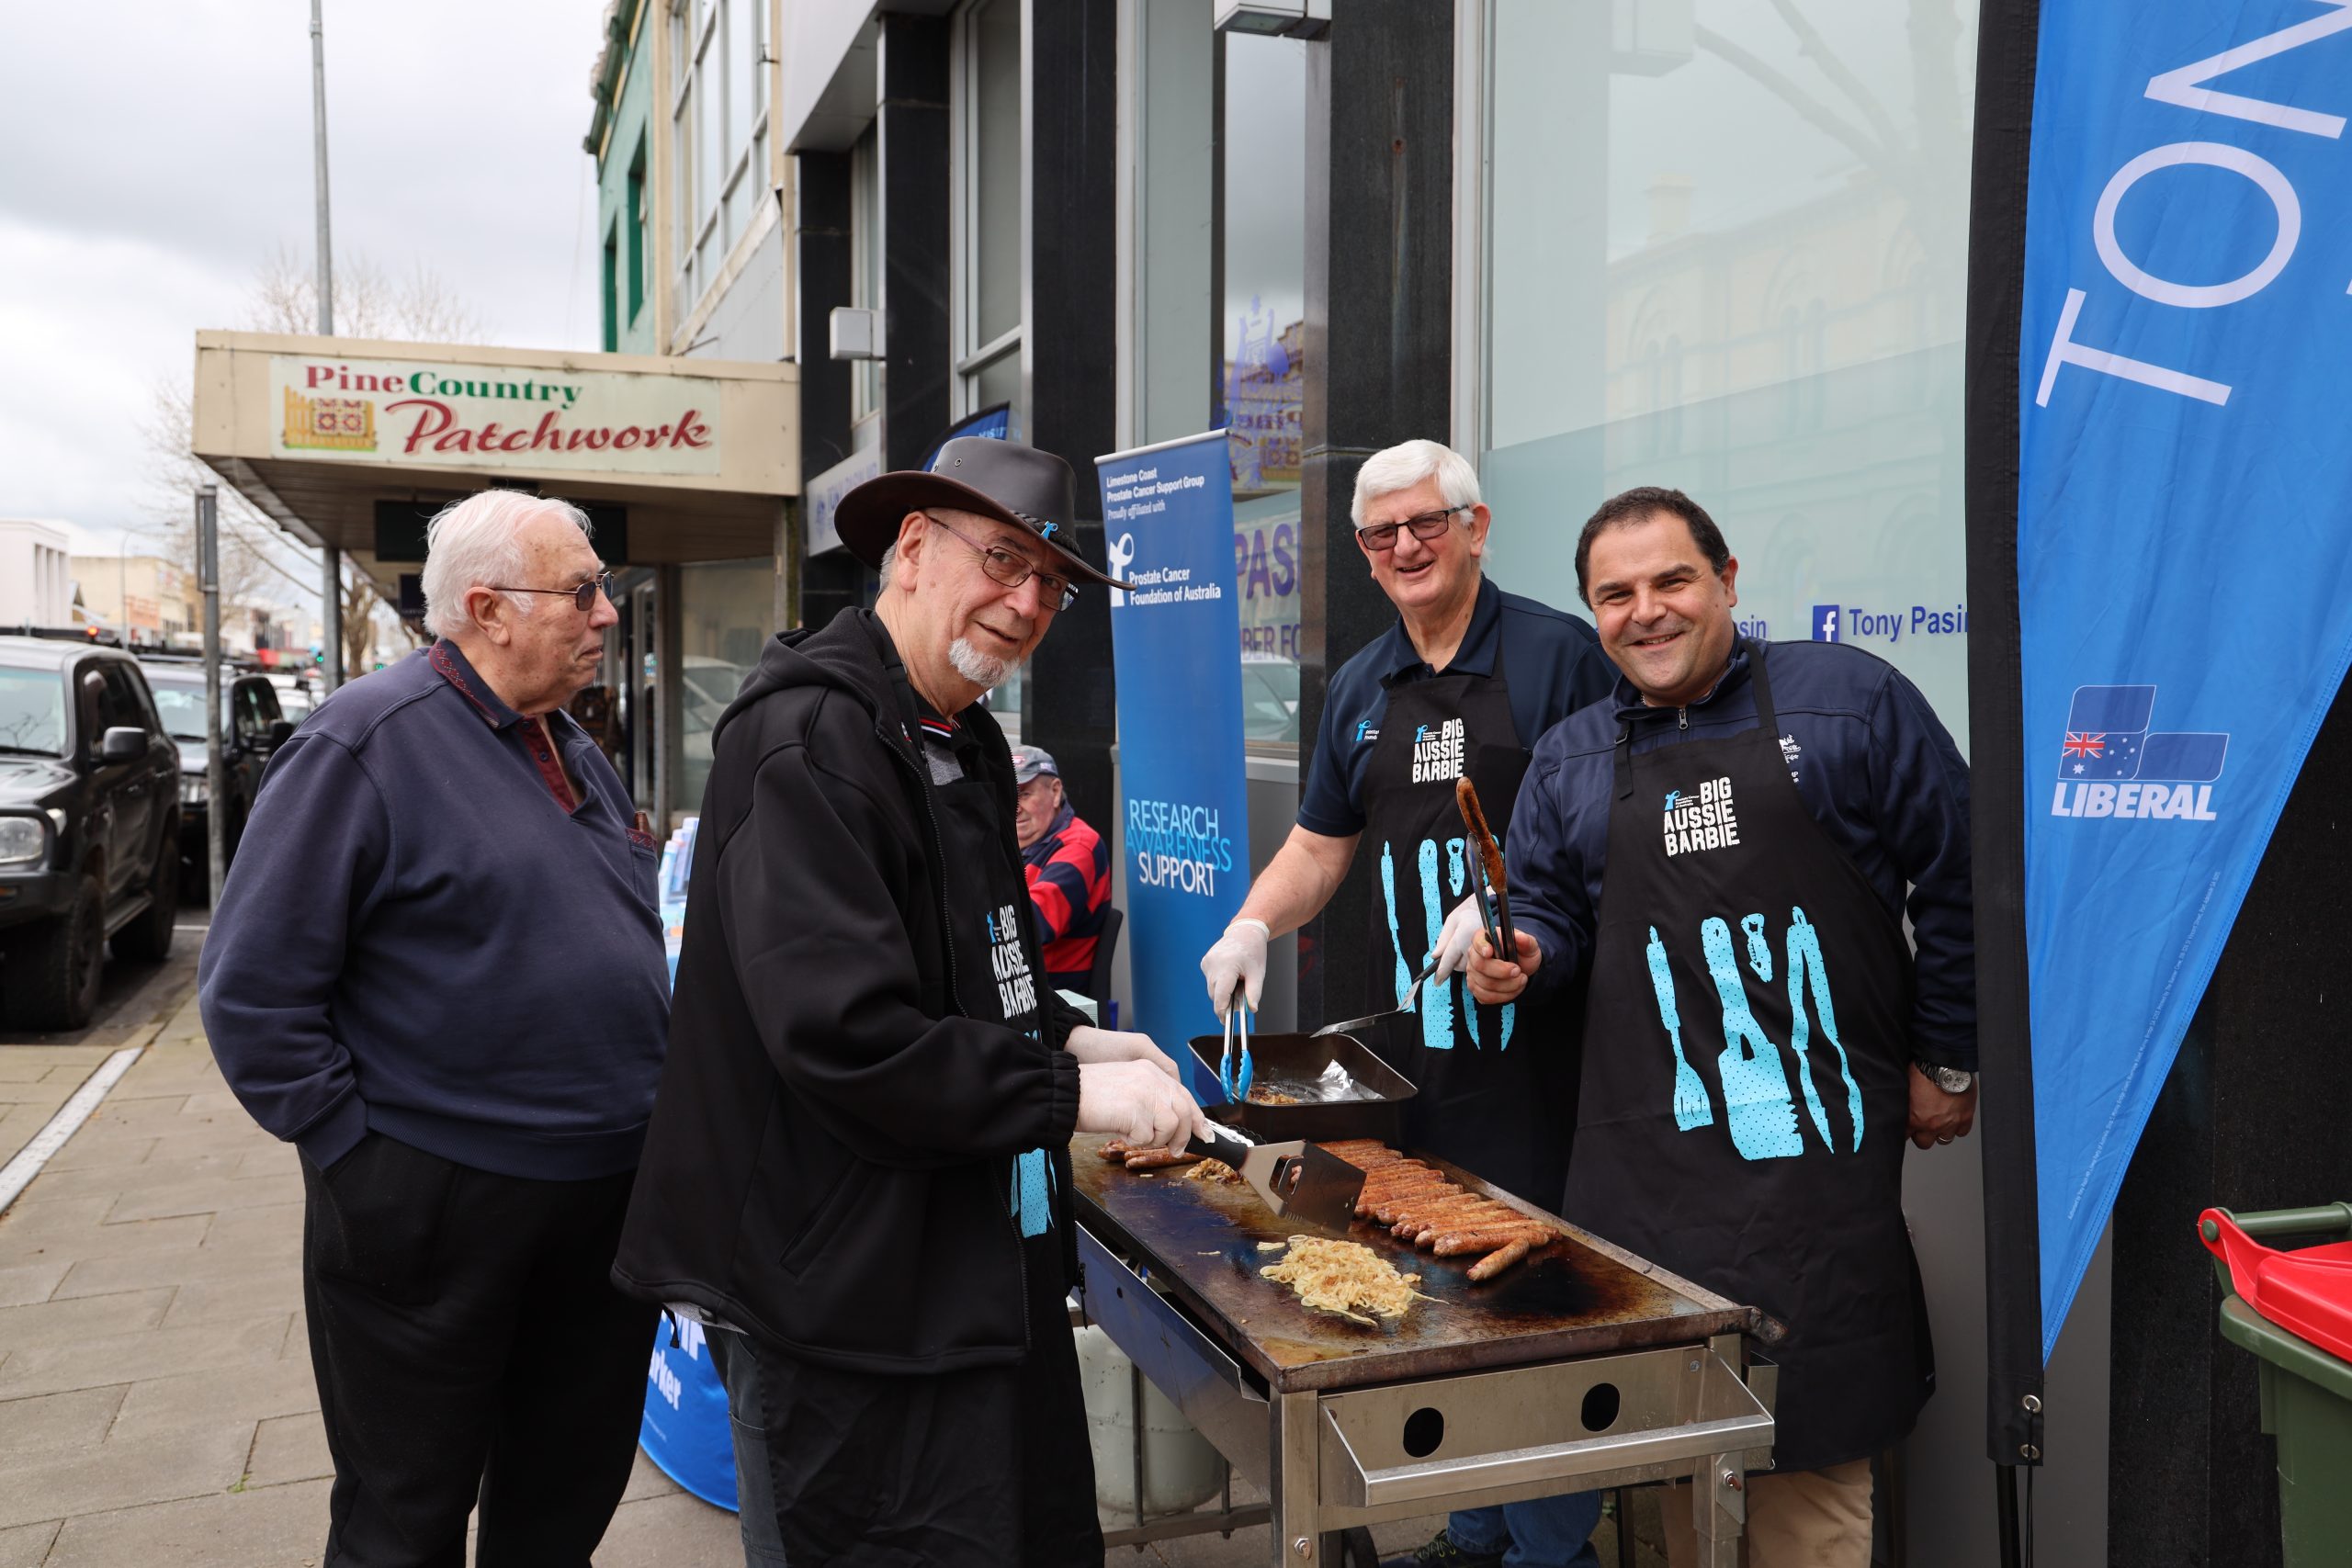 PASIN’S BIG AUSSIE BBQ BACK FOR NINTH YEAR